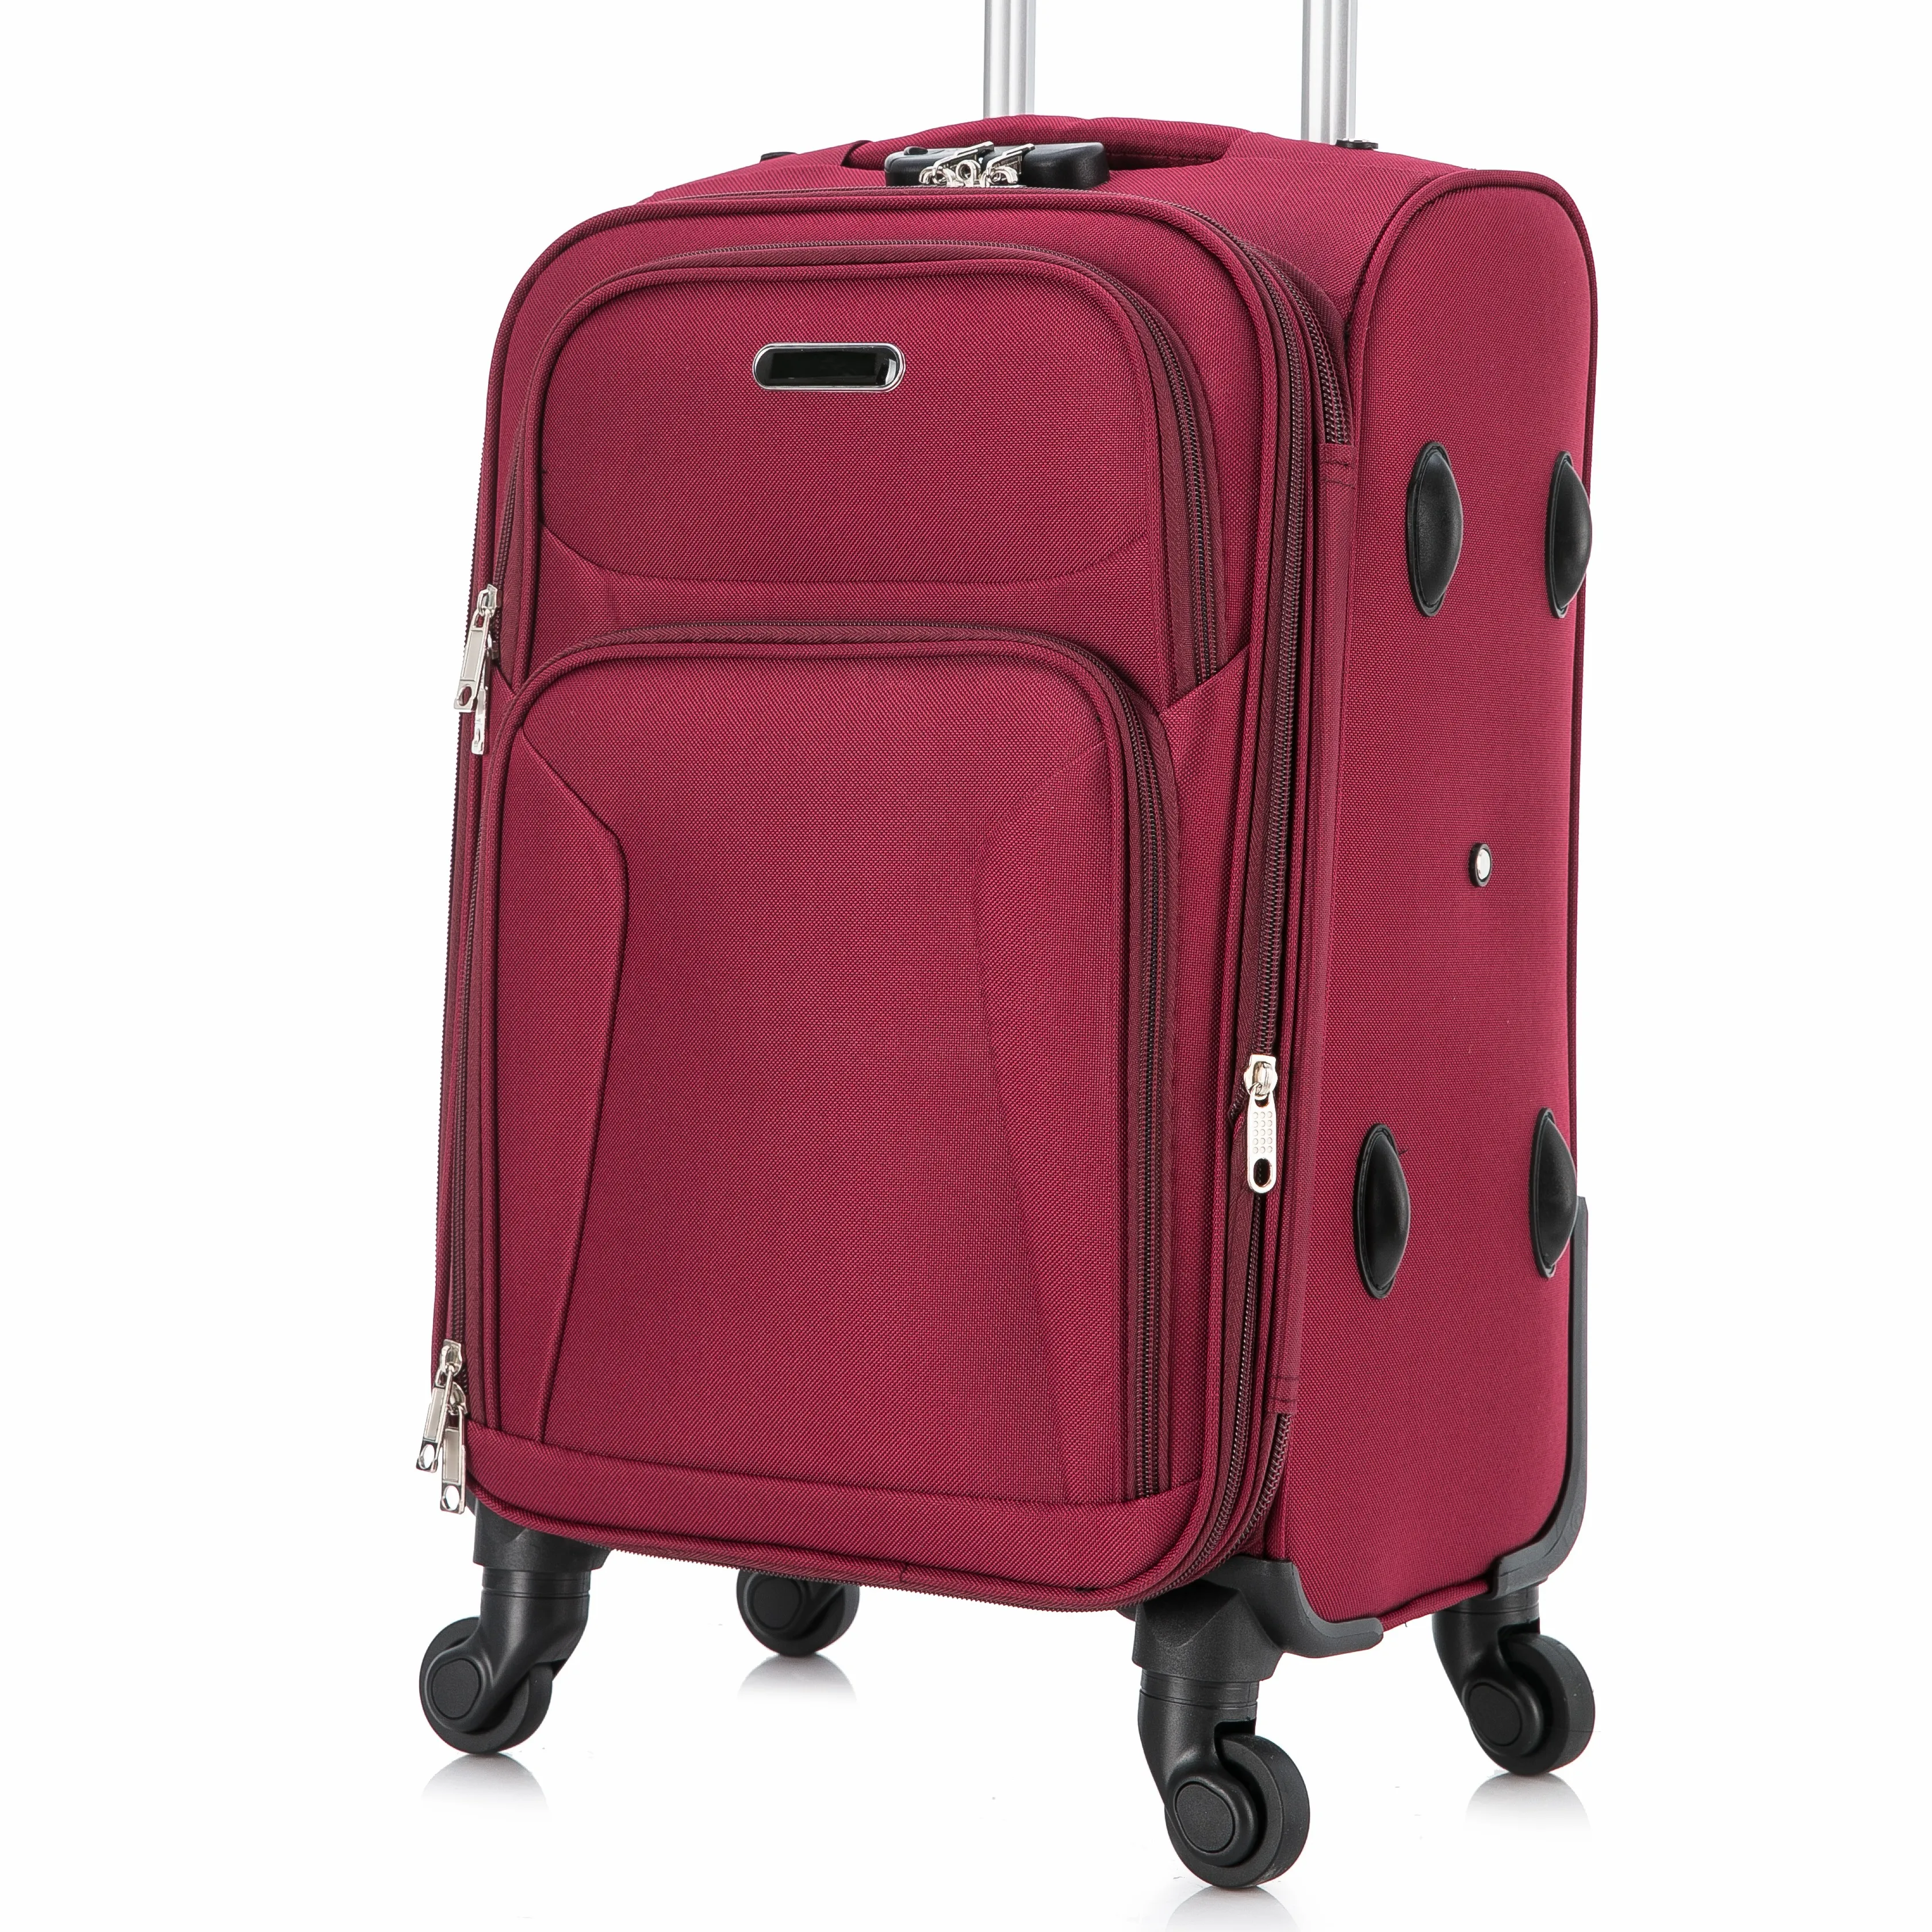 Hot selling EVA travel luggage with expandable zipper fabric suitcase Trolley bags Luggage For Travel